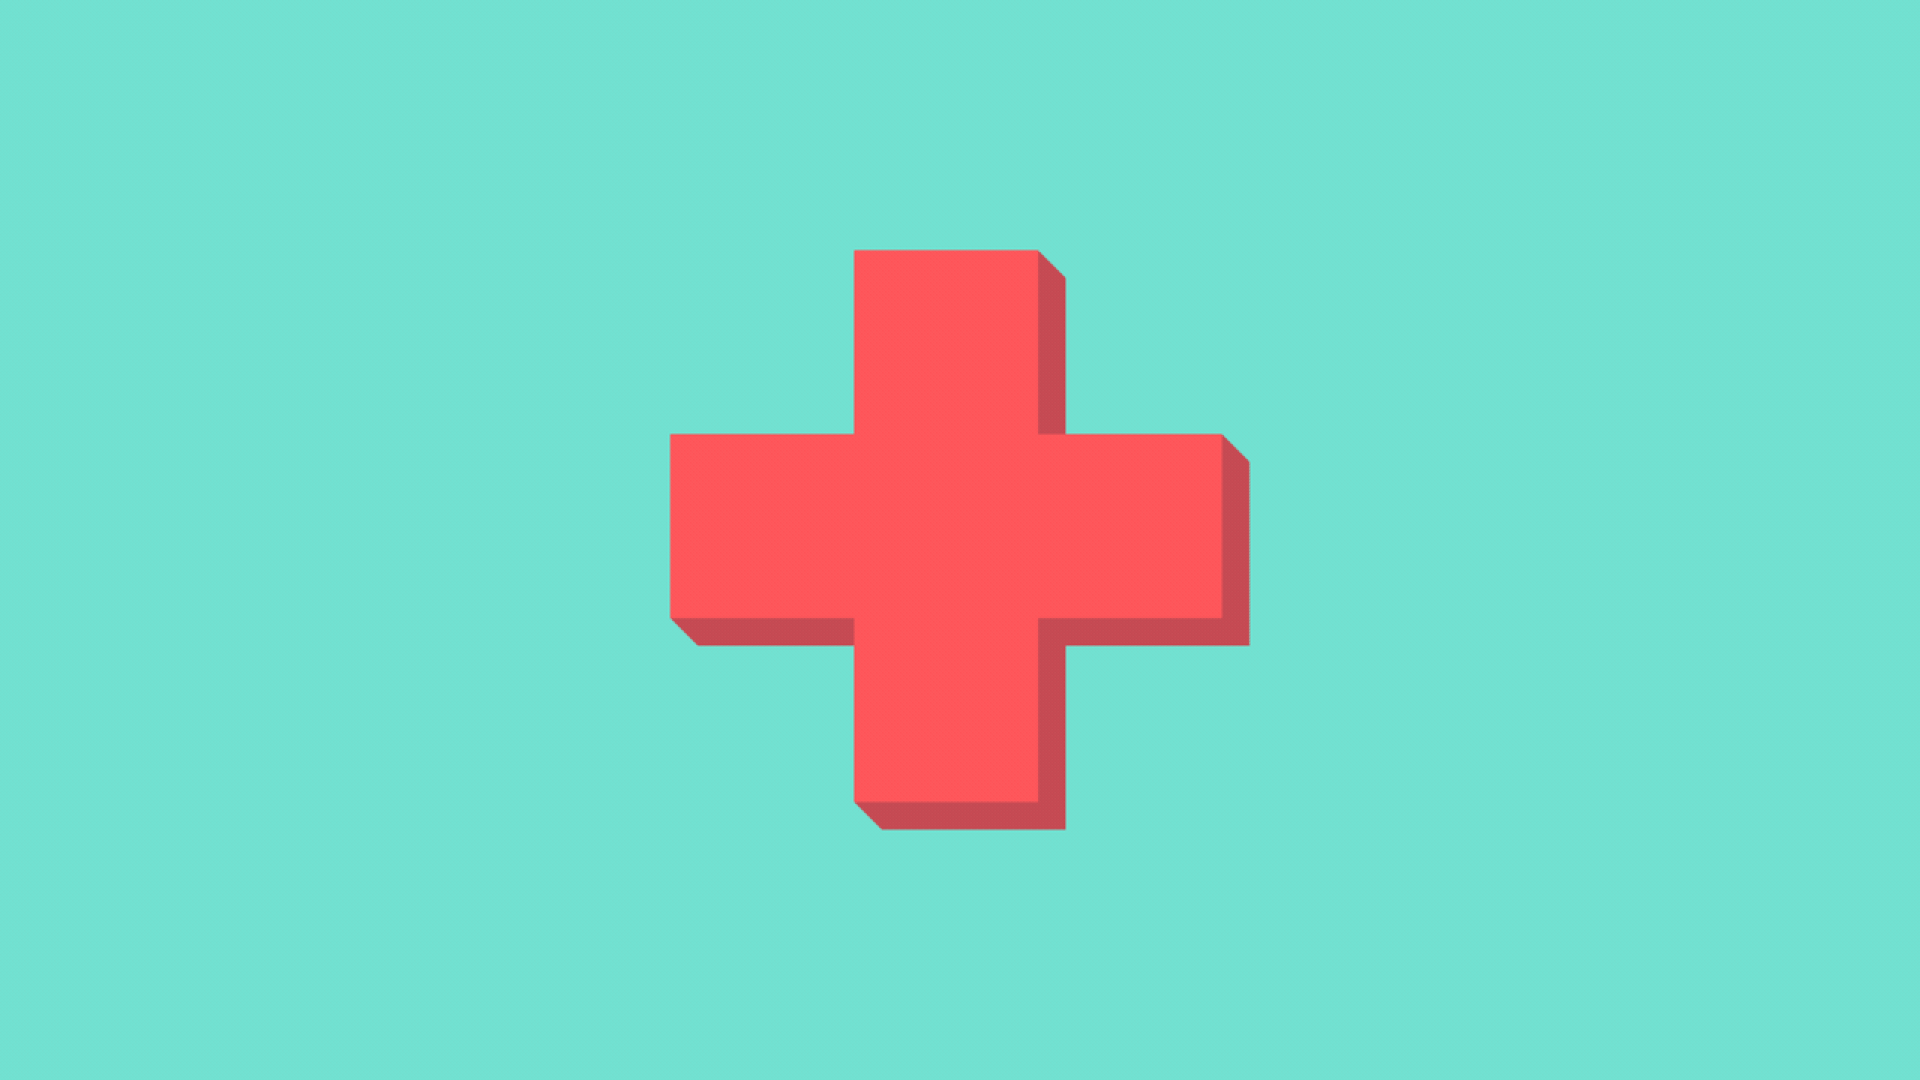 A gif of red crosses multiplying